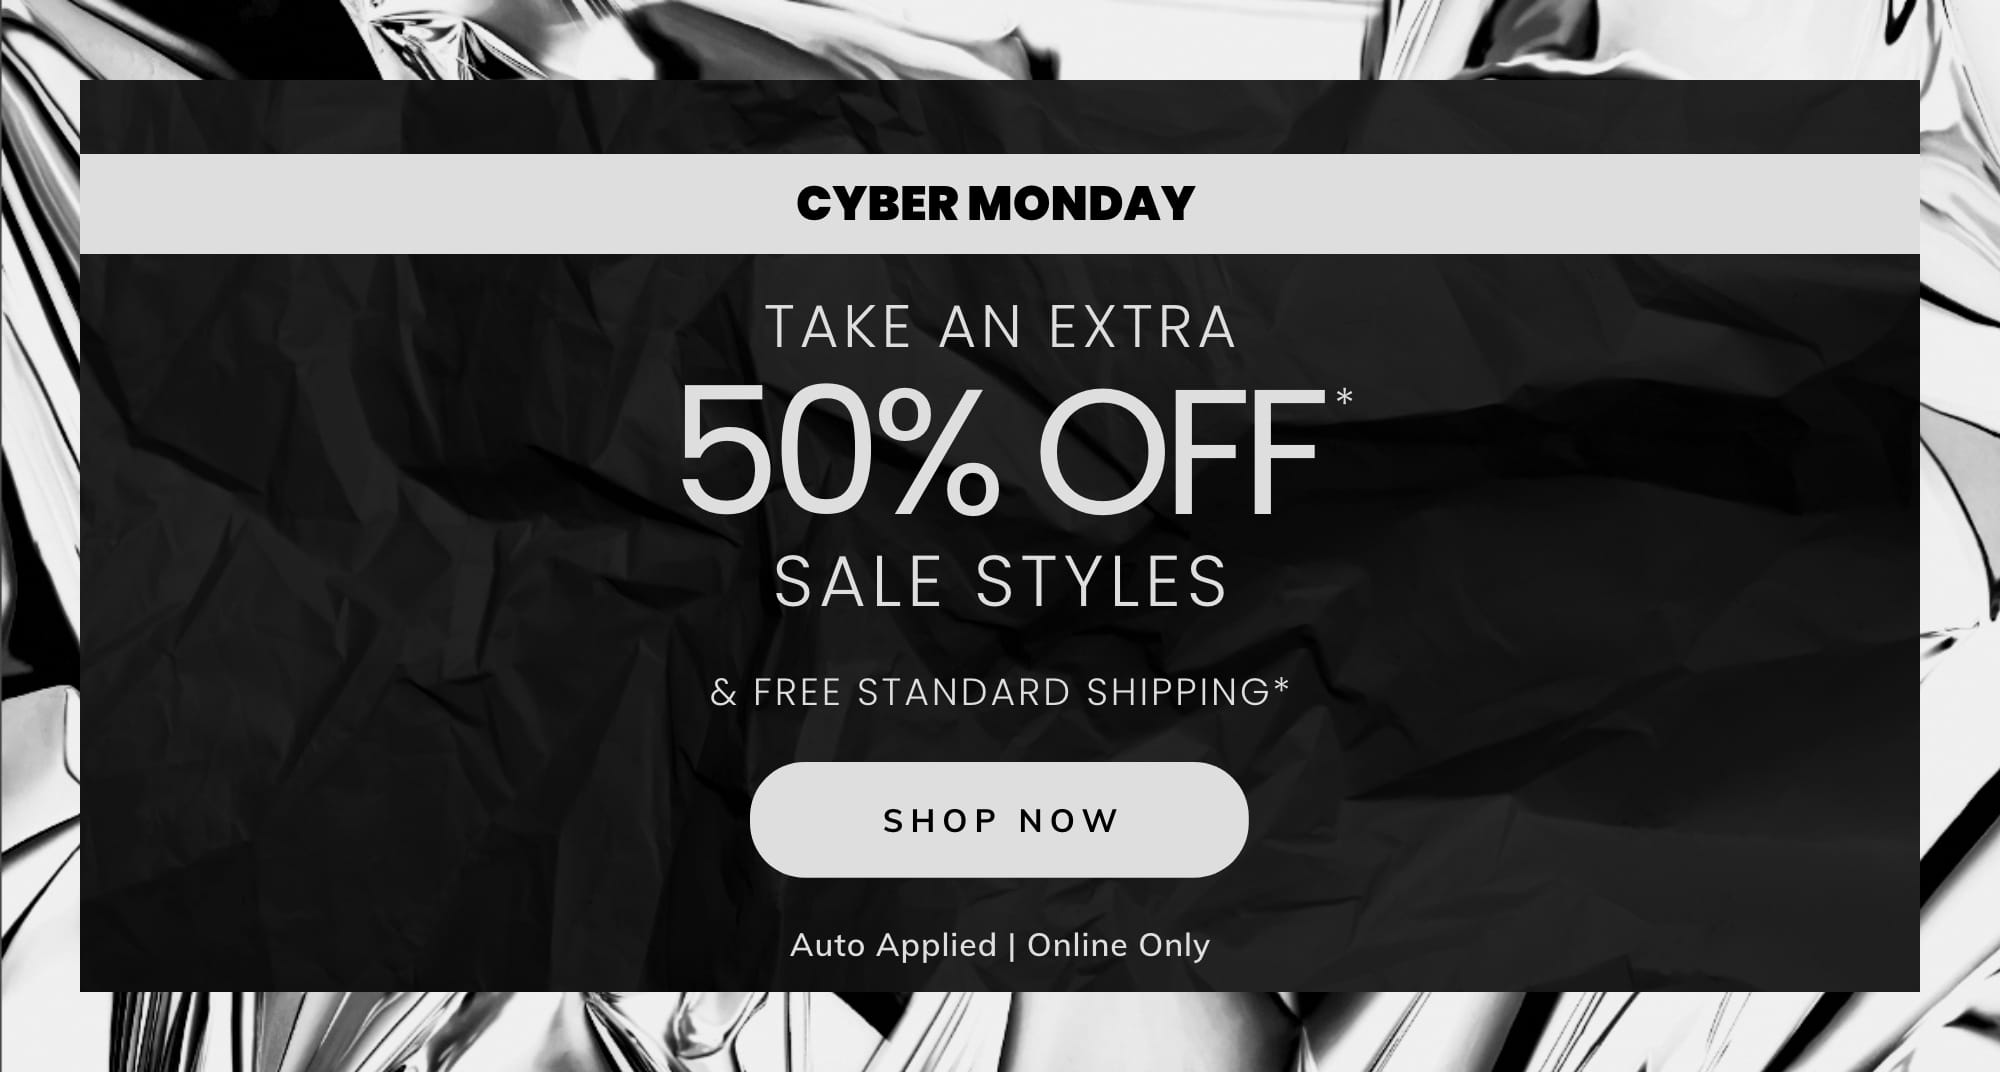 TAKE AN EXTRA 50% OFF SALE STYLES AND FREE STANDARD SHIPPING